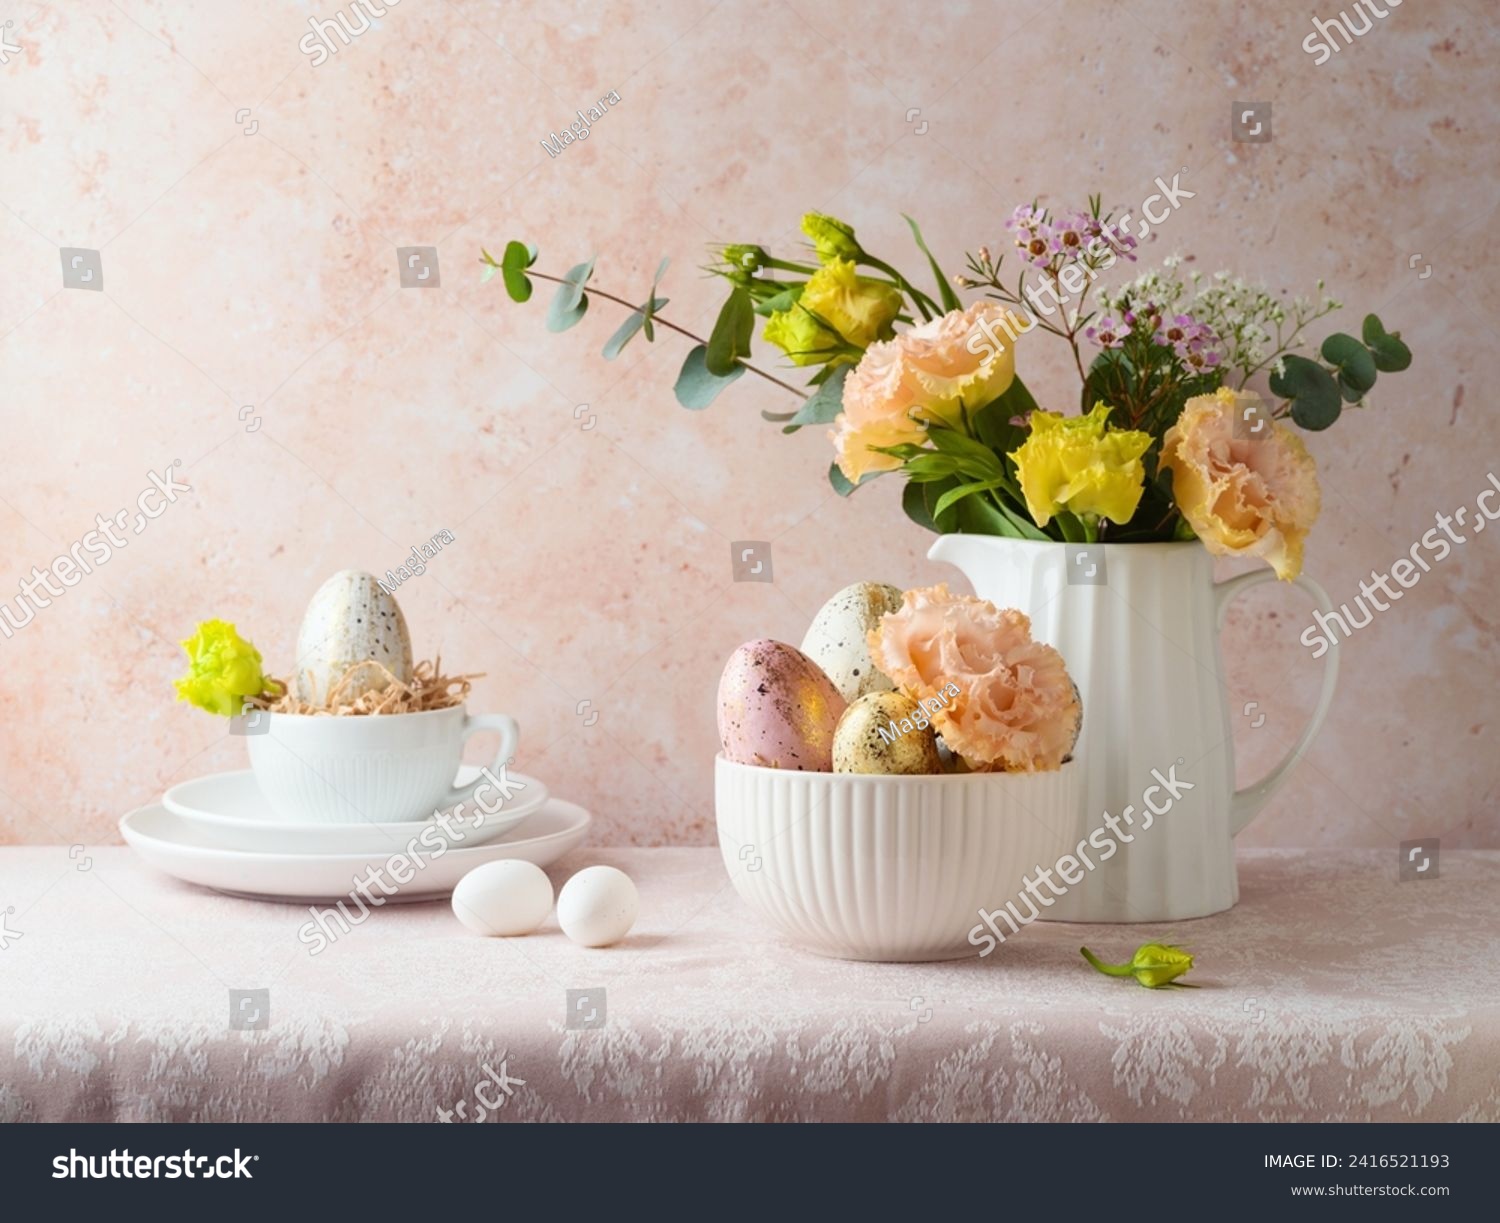 Easter holiday celebration with flowers bouquet and Easter eggs decoration on table over bright  background #2416521193